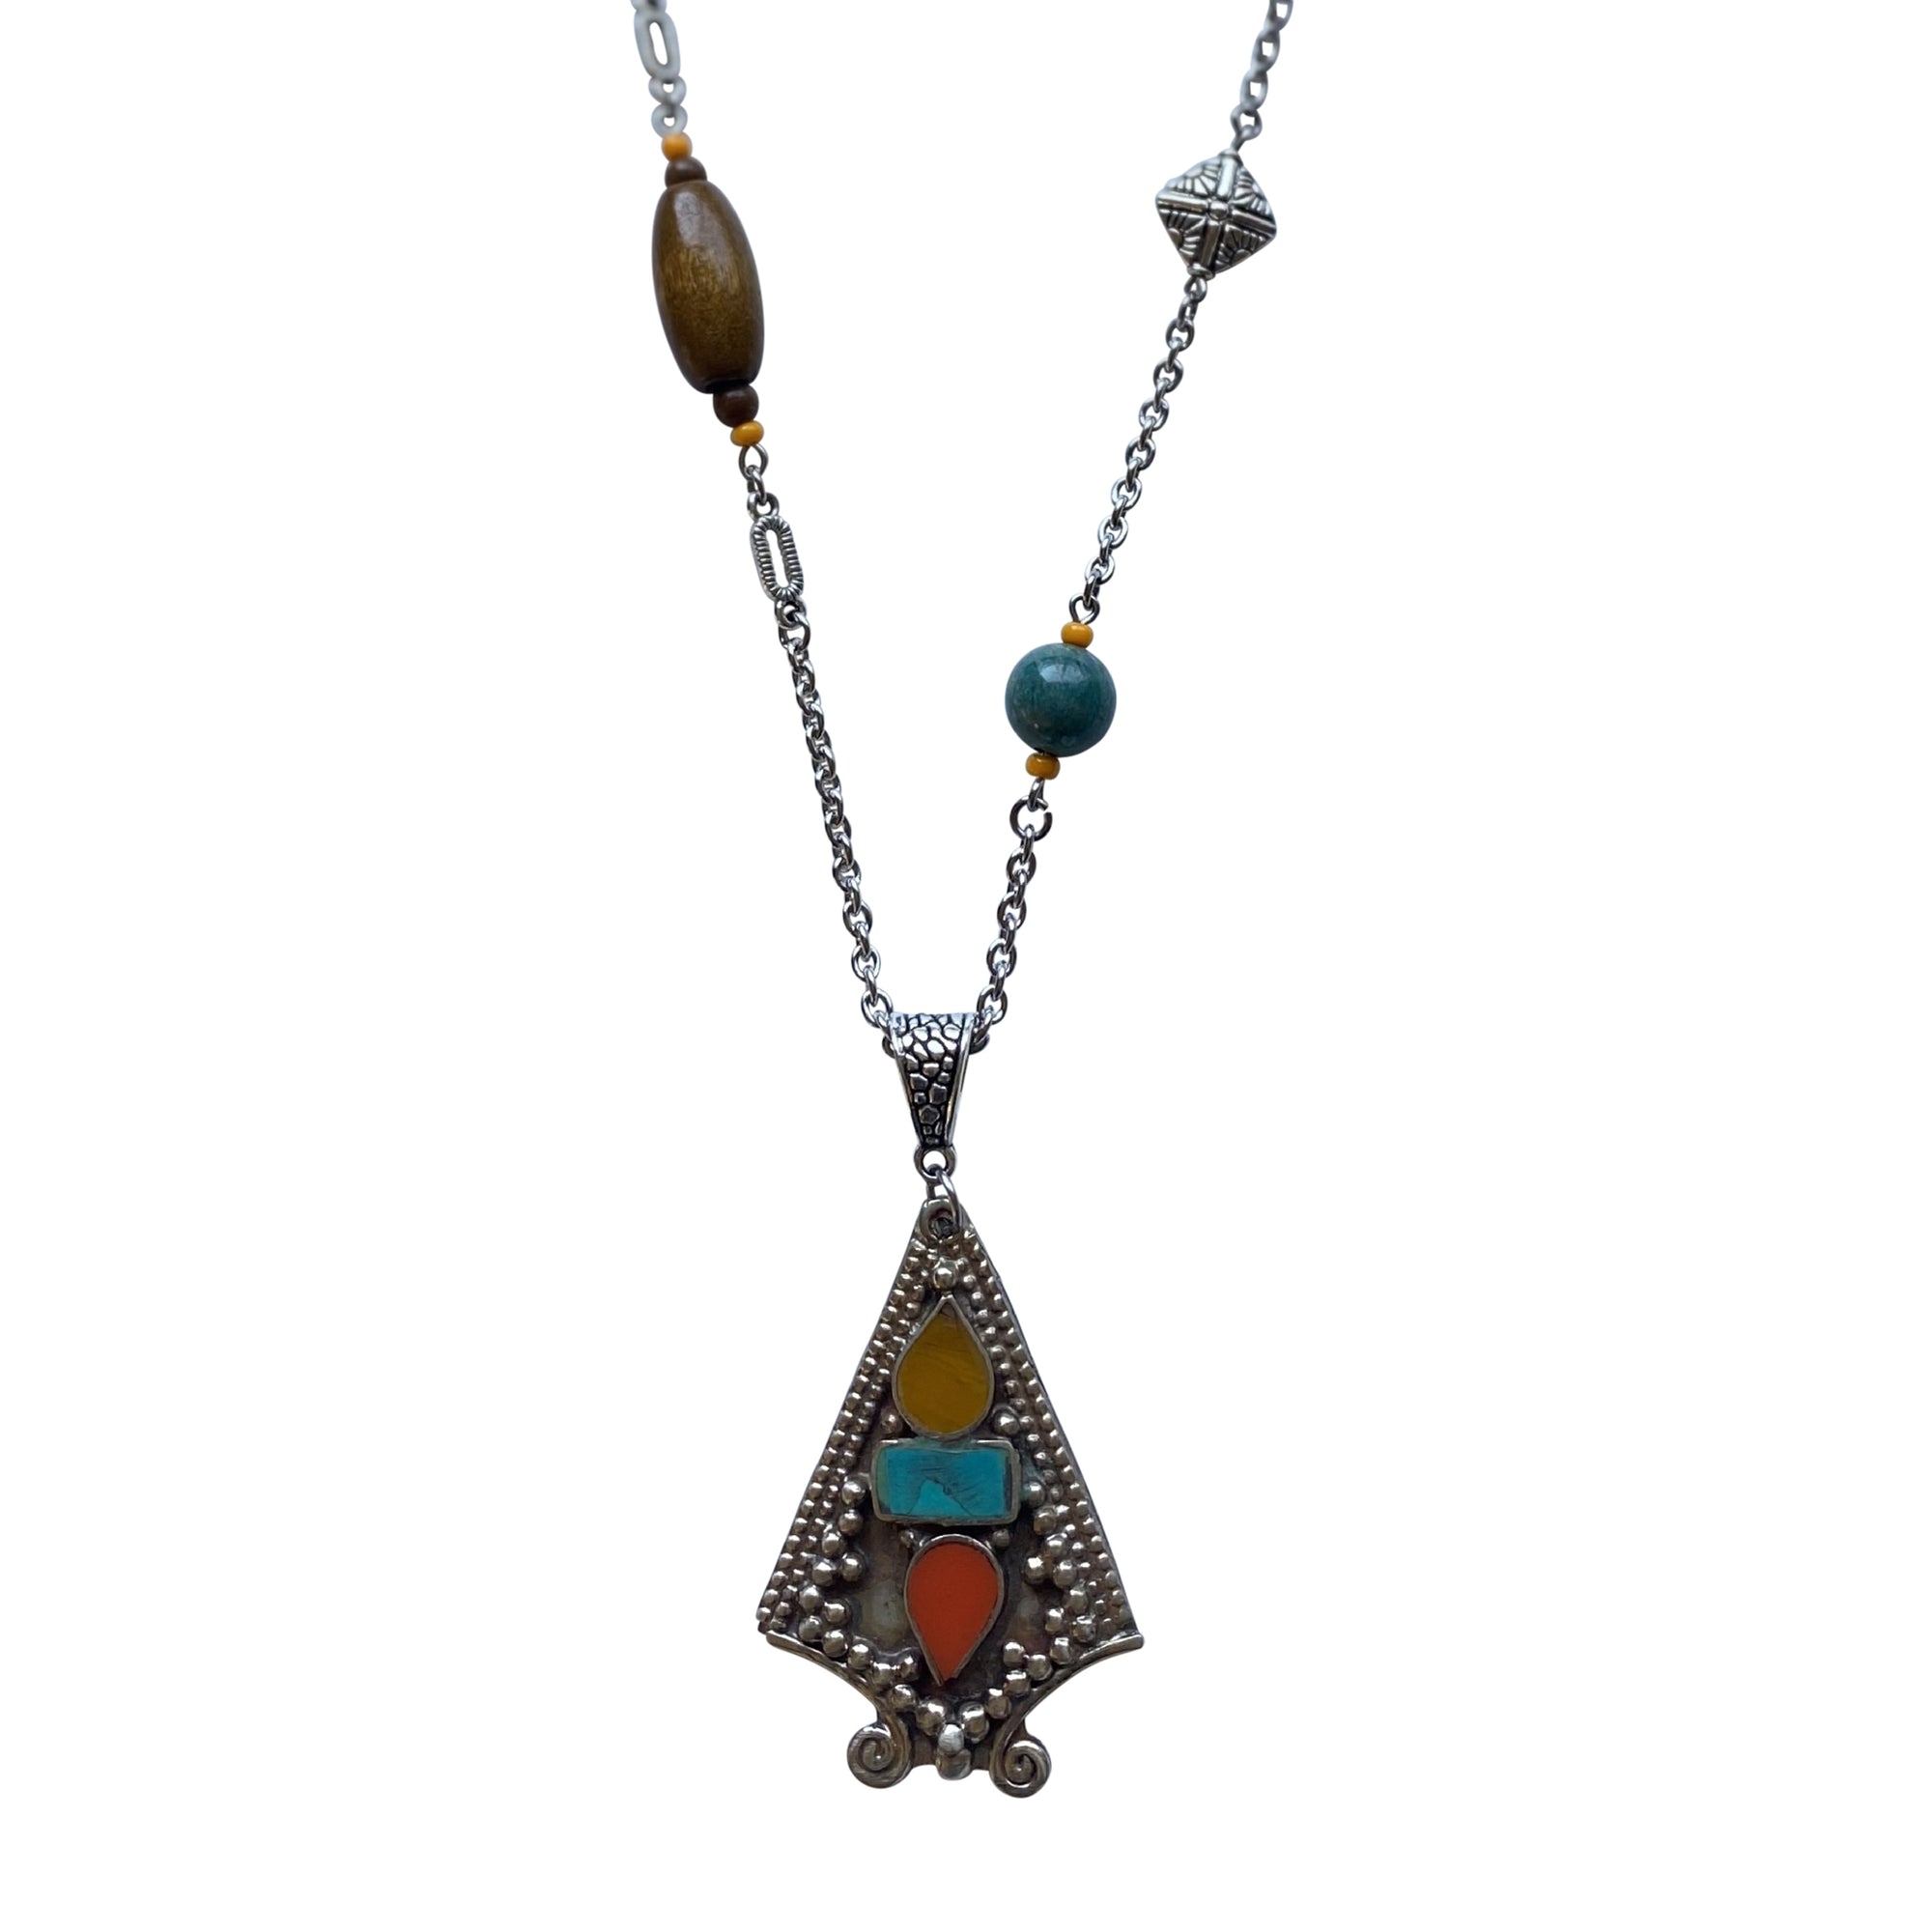 Tibetan Silver Coral and Turquoise Pendant Necklace with Wood Beads- Creative Jewelry by Marcia